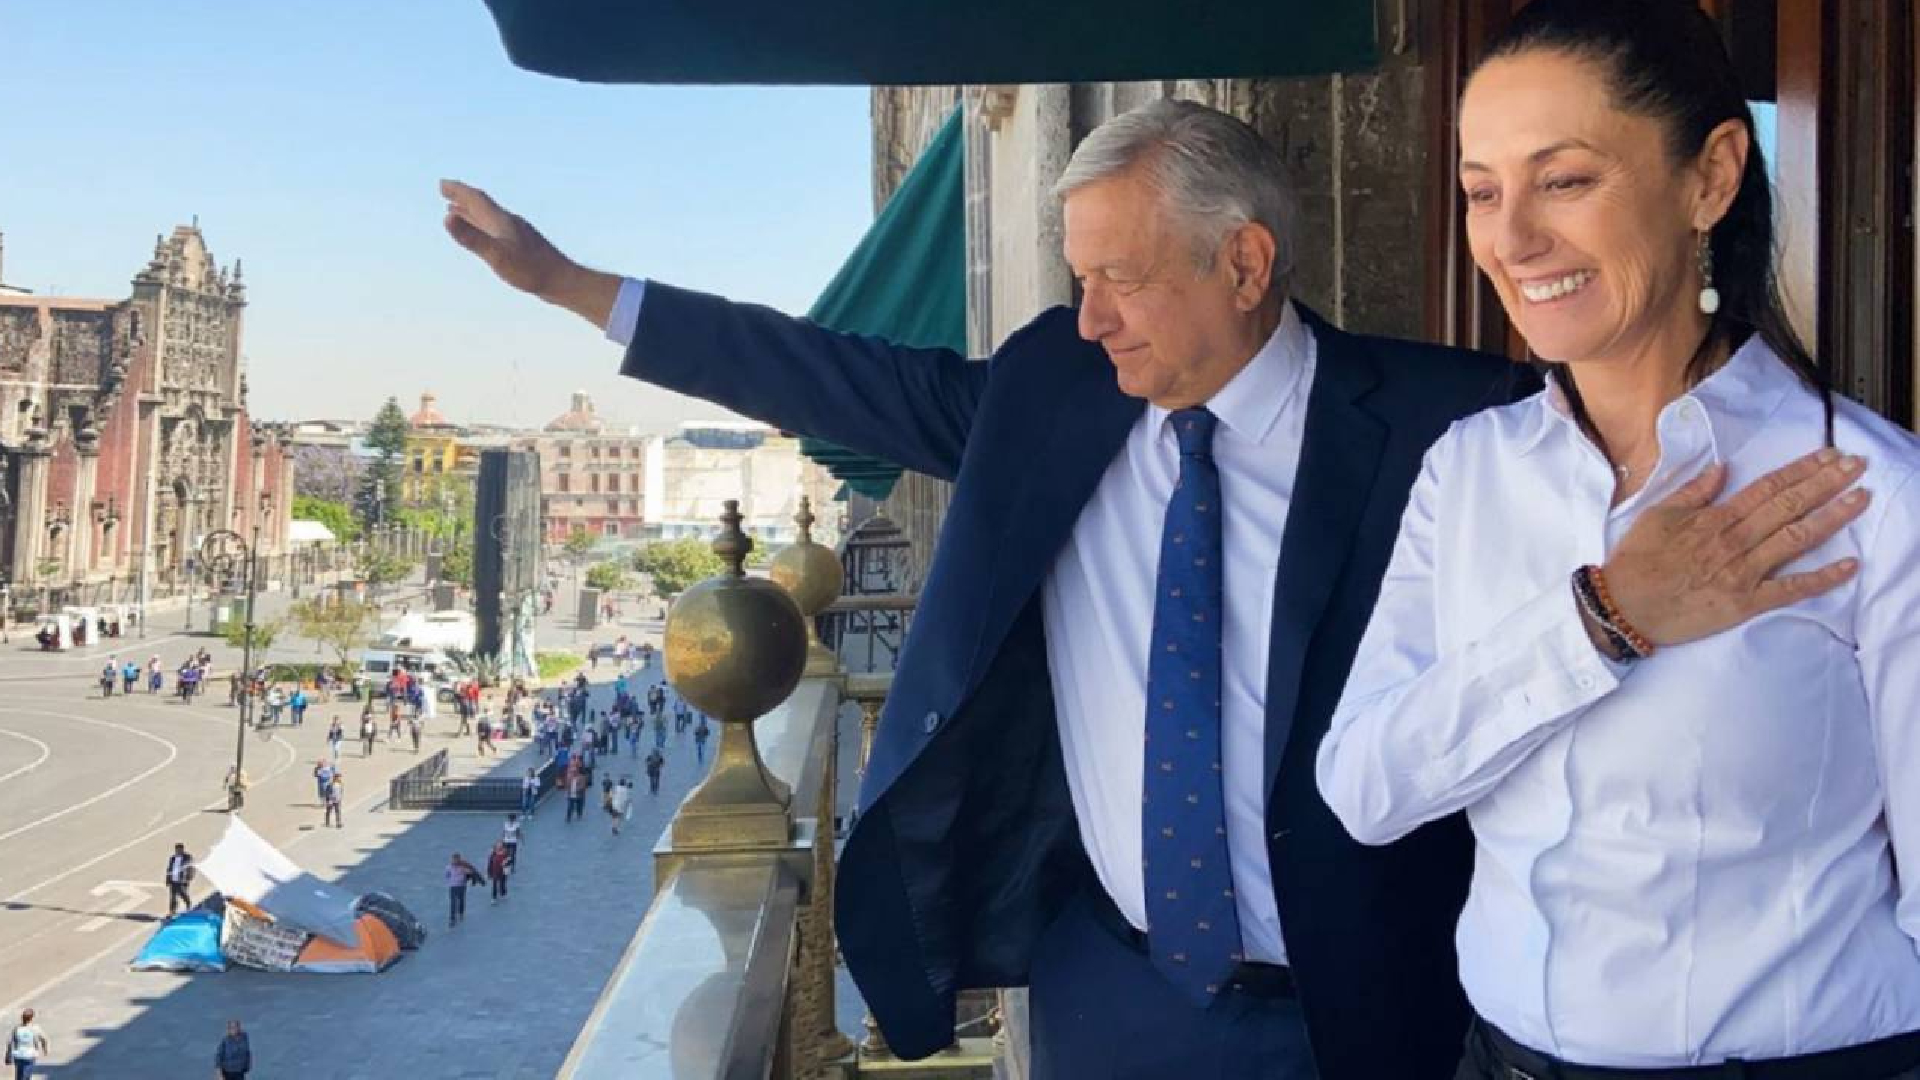 The head of government of the CDMX, Claudia Sheinbaum, witnesses the Military Parade on September 16 with President López Obrador in the Zócalo (Photo: Cuartoscuro)